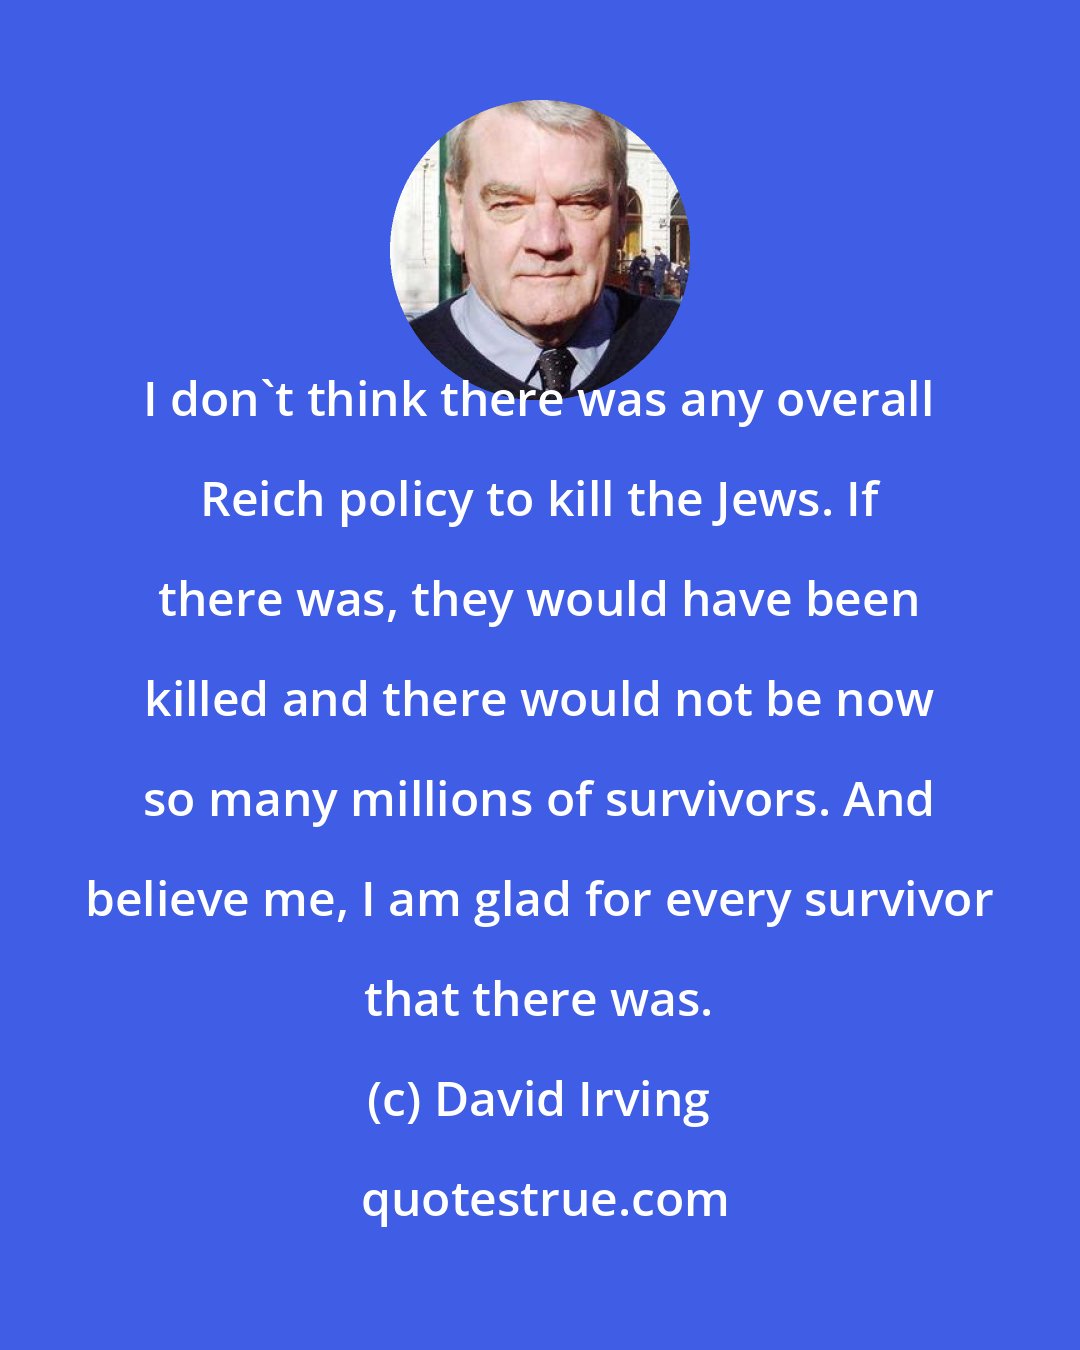 David Irving: I don't think there was any overall Reich policy to kill the Jews. If there was, they would have been killed and there would not be now so many millions of survivors. And believe me, I am glad for every survivor that there was.